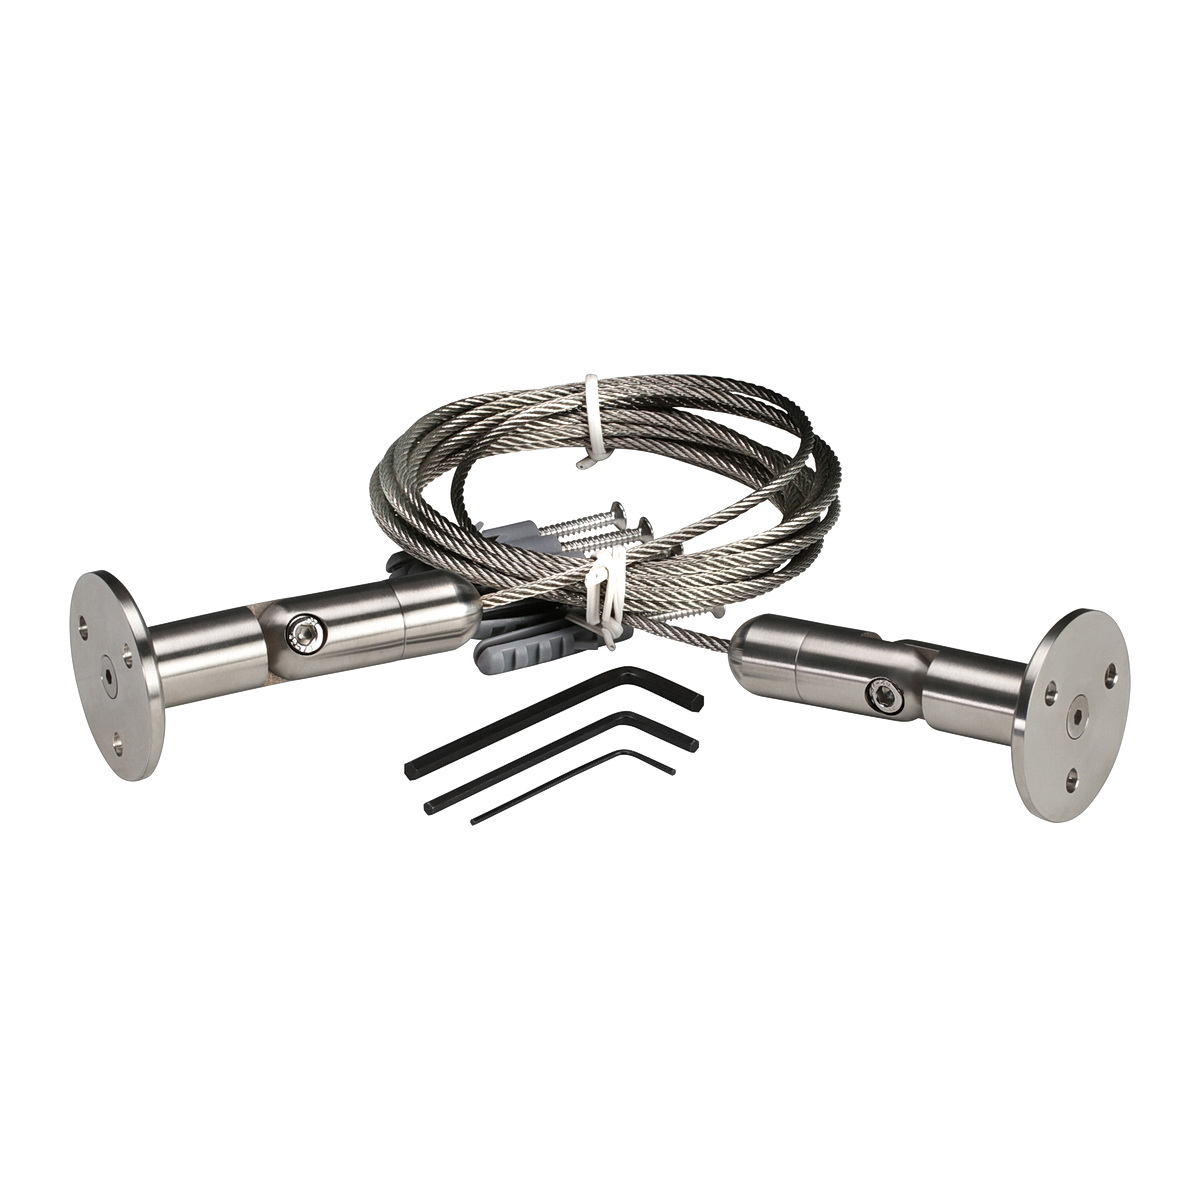 Stainless Steel Cable System Kit  Multi Angle, Cable Diameter: 1/8'' (3 mm) Length 13' 1'' (4.00m)